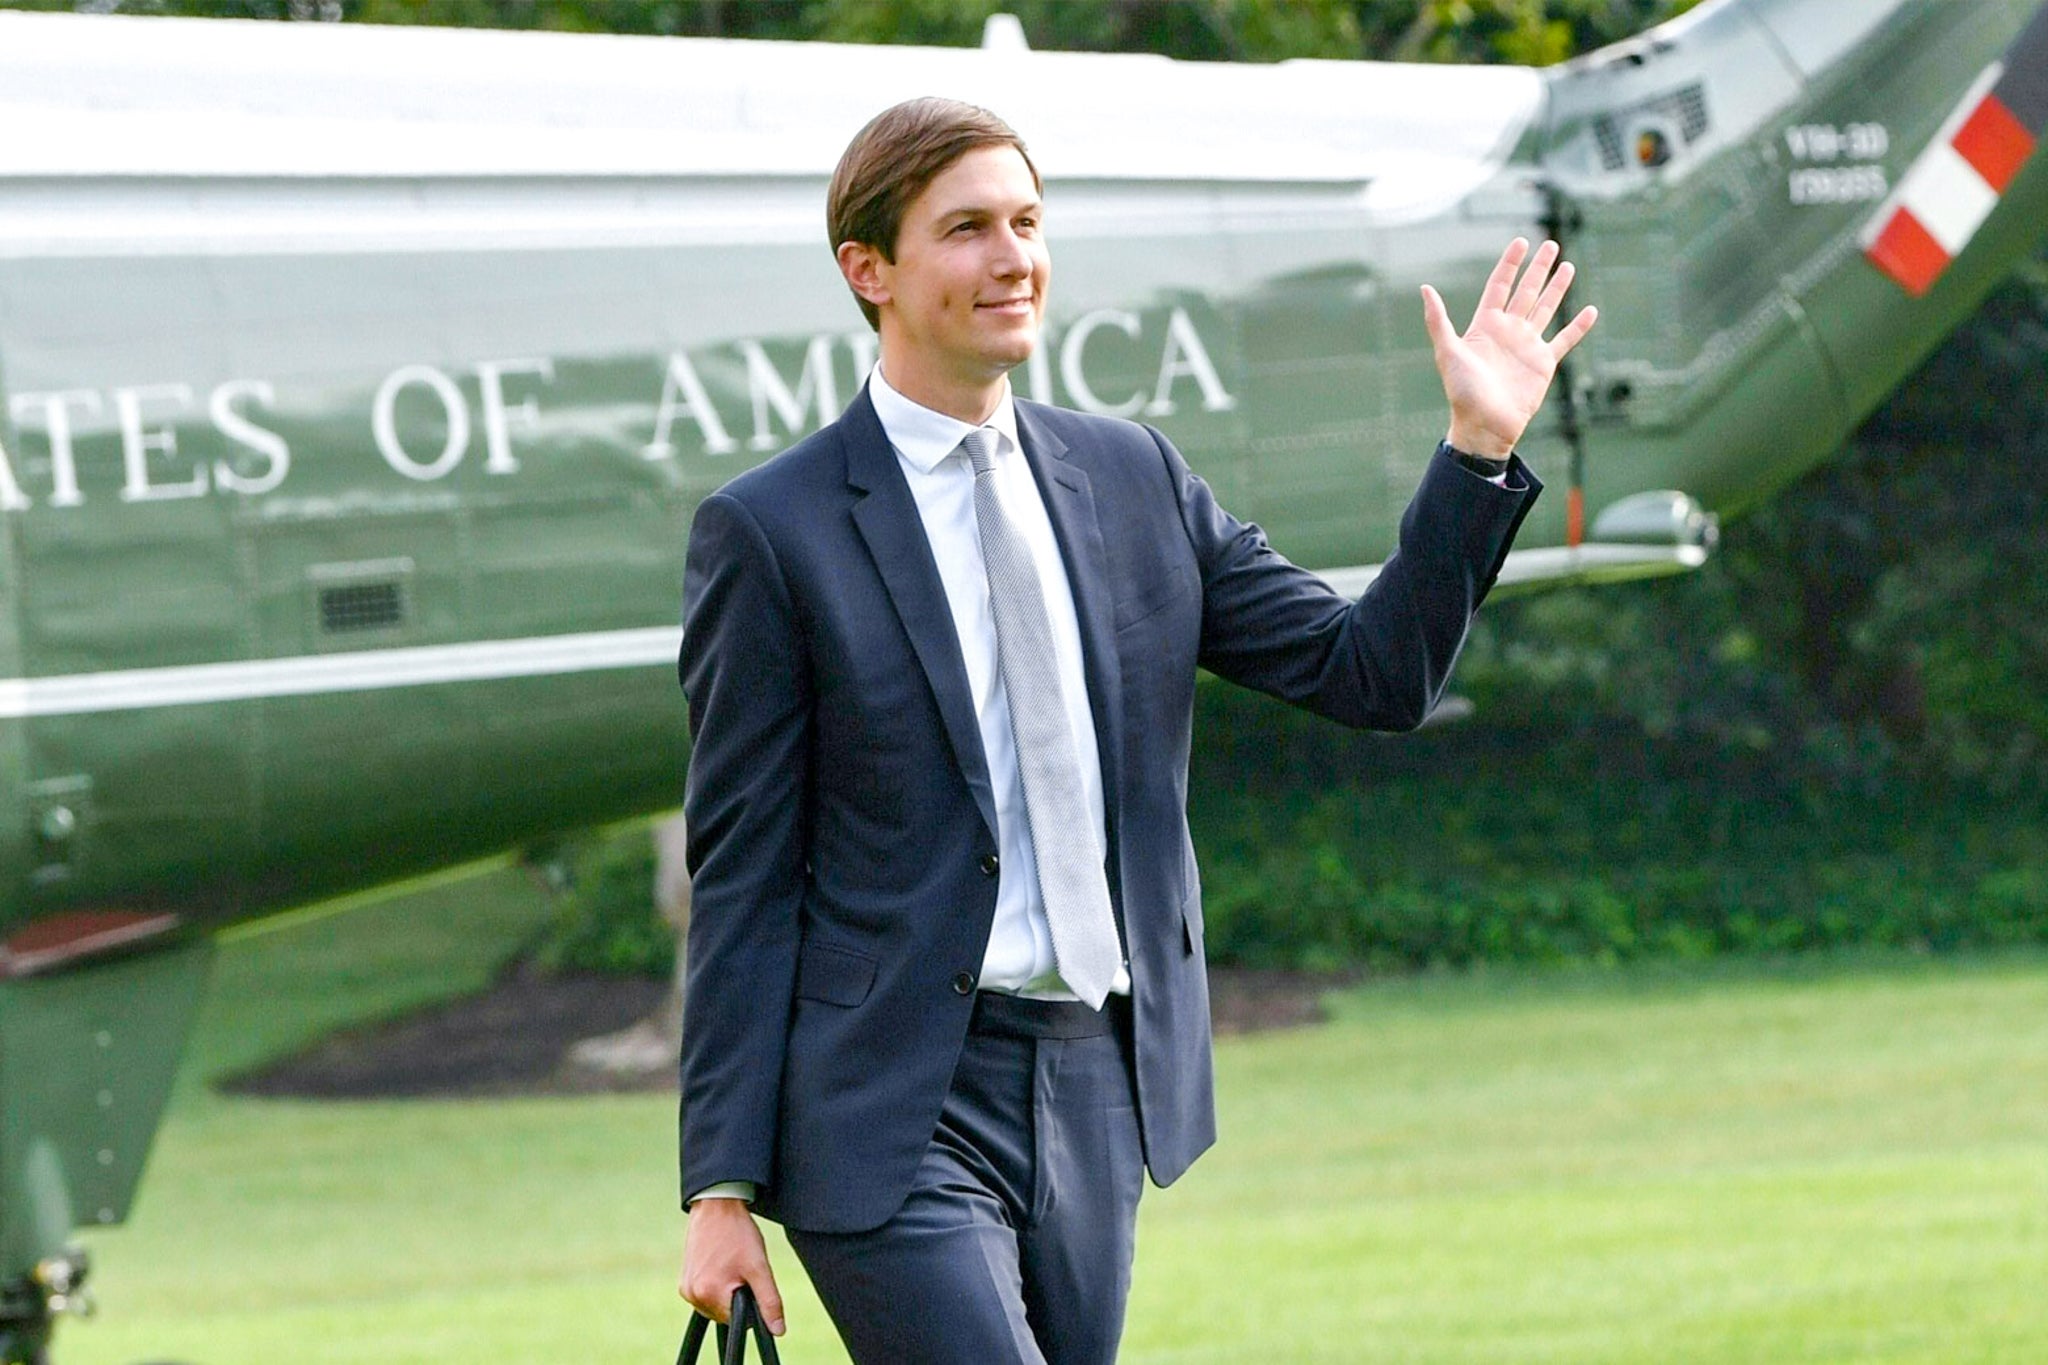 A photo shows Kushner striding across the White House lawn after getting off a helicopter painted with the words "United States of America." He waves, wearing a slim suit, dimples on his cheeks.